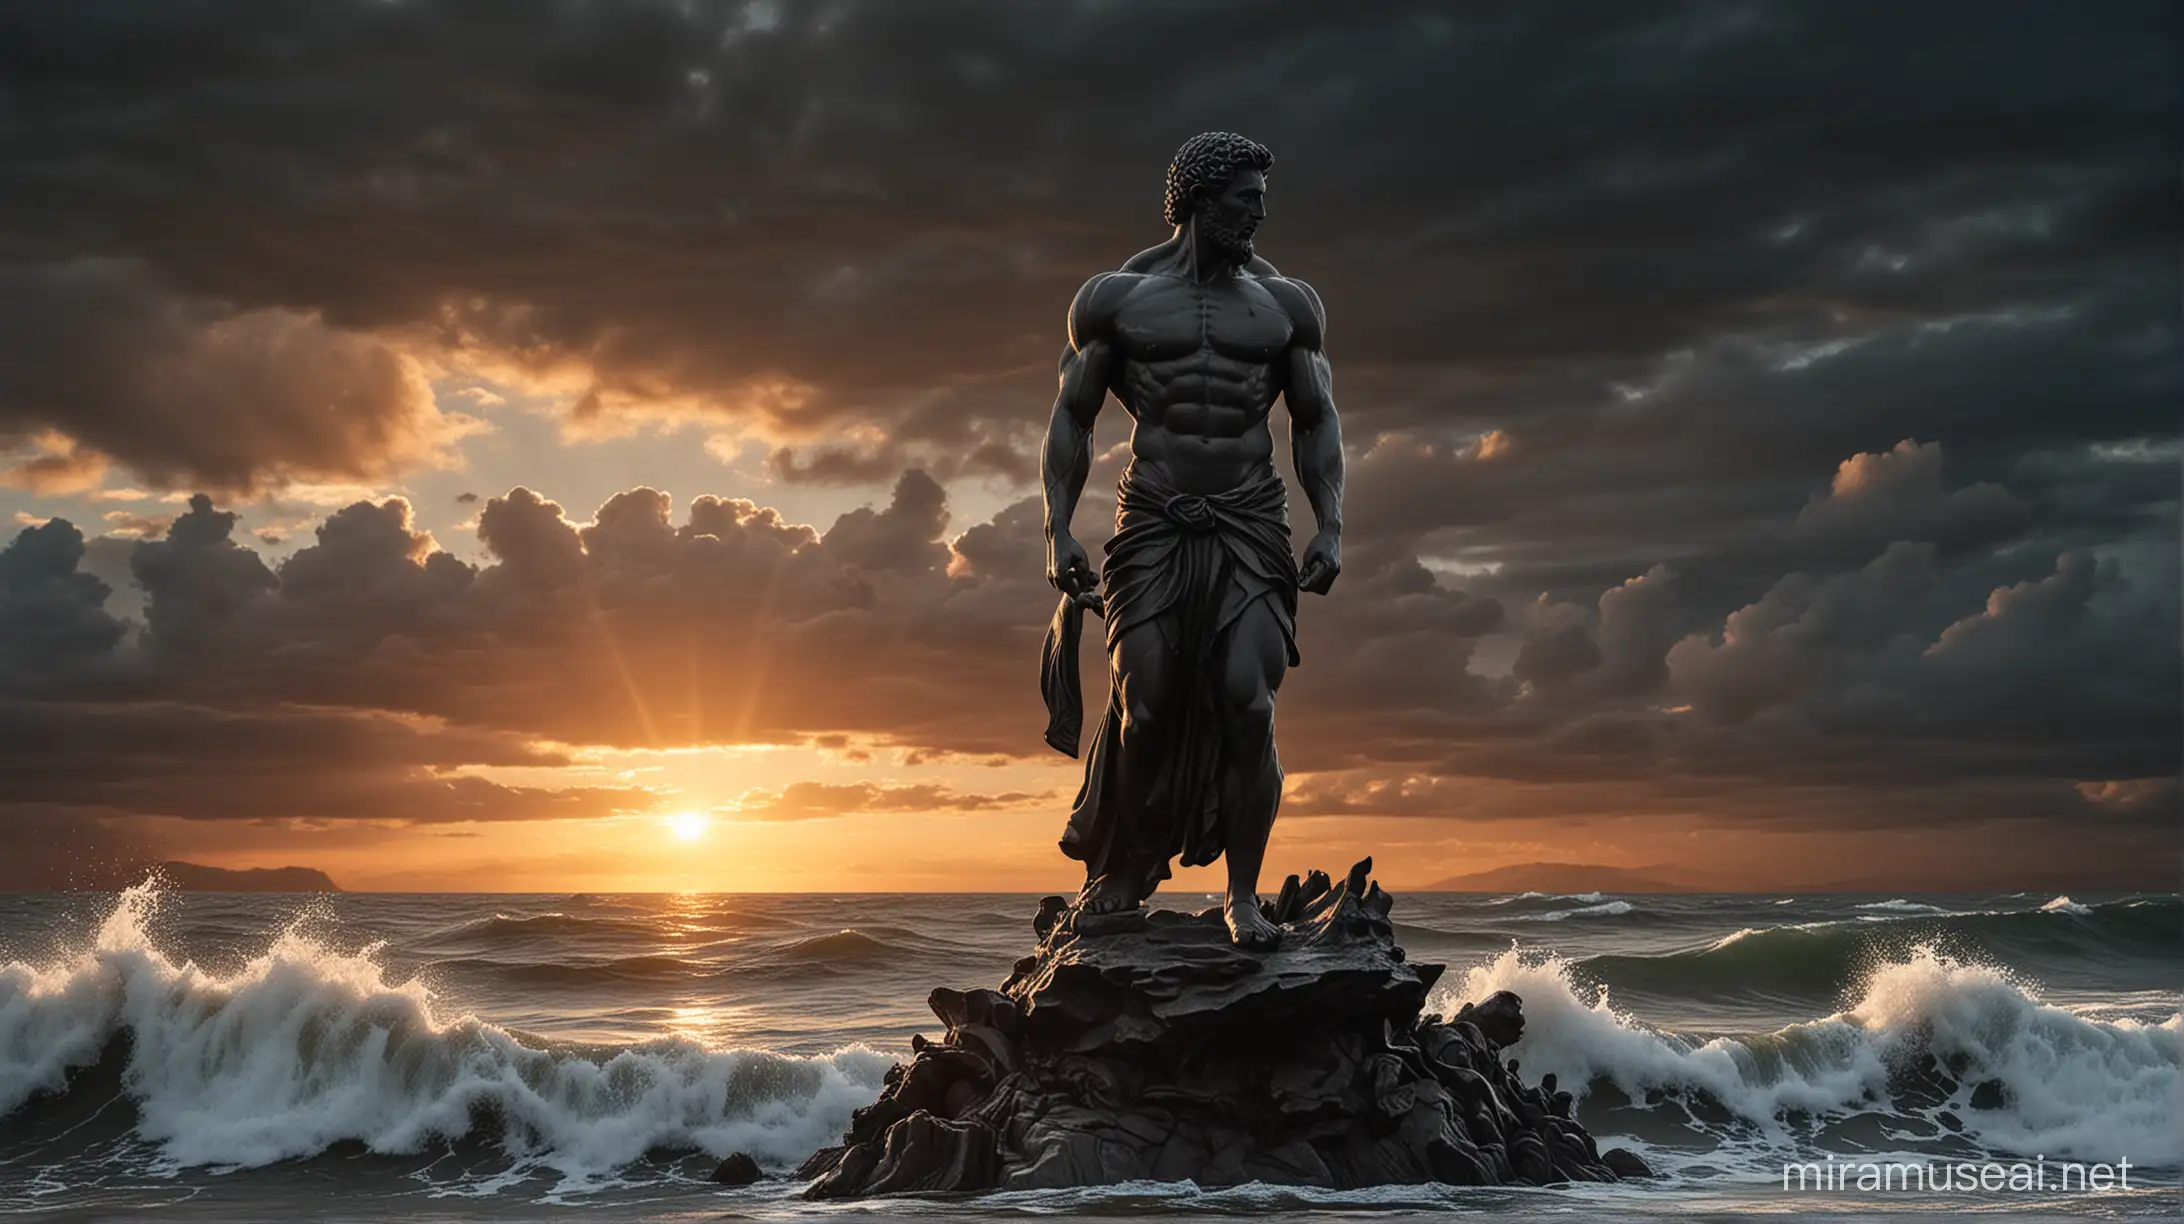 Stoicism, Motivation, stoic muscular statues outside , dark sunset, 
behind him is a tsunami

